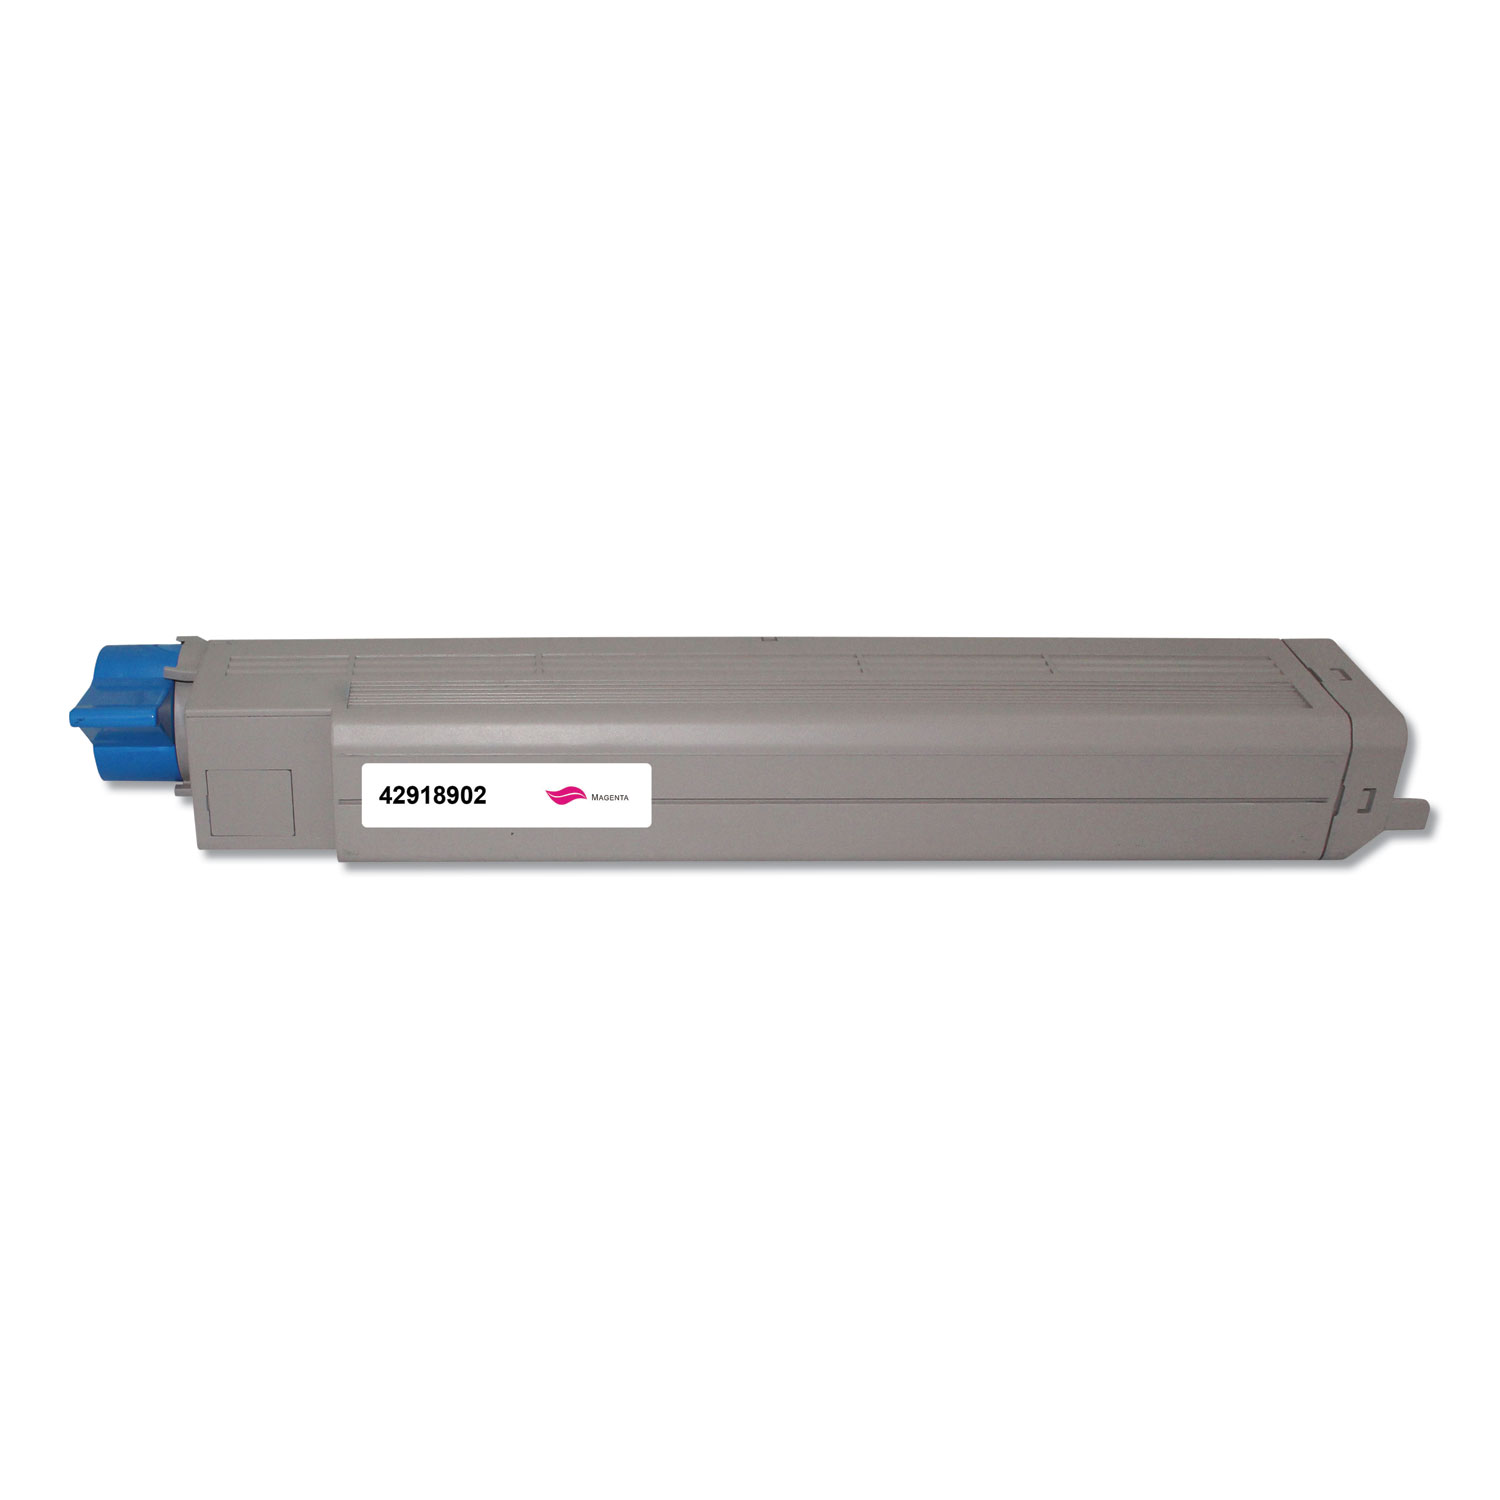  Innovera AC-O9600MR Remanufactured 42918902 (Type C7) Toner, 15000 Page-Yield, Magenta (IVR42918902) 